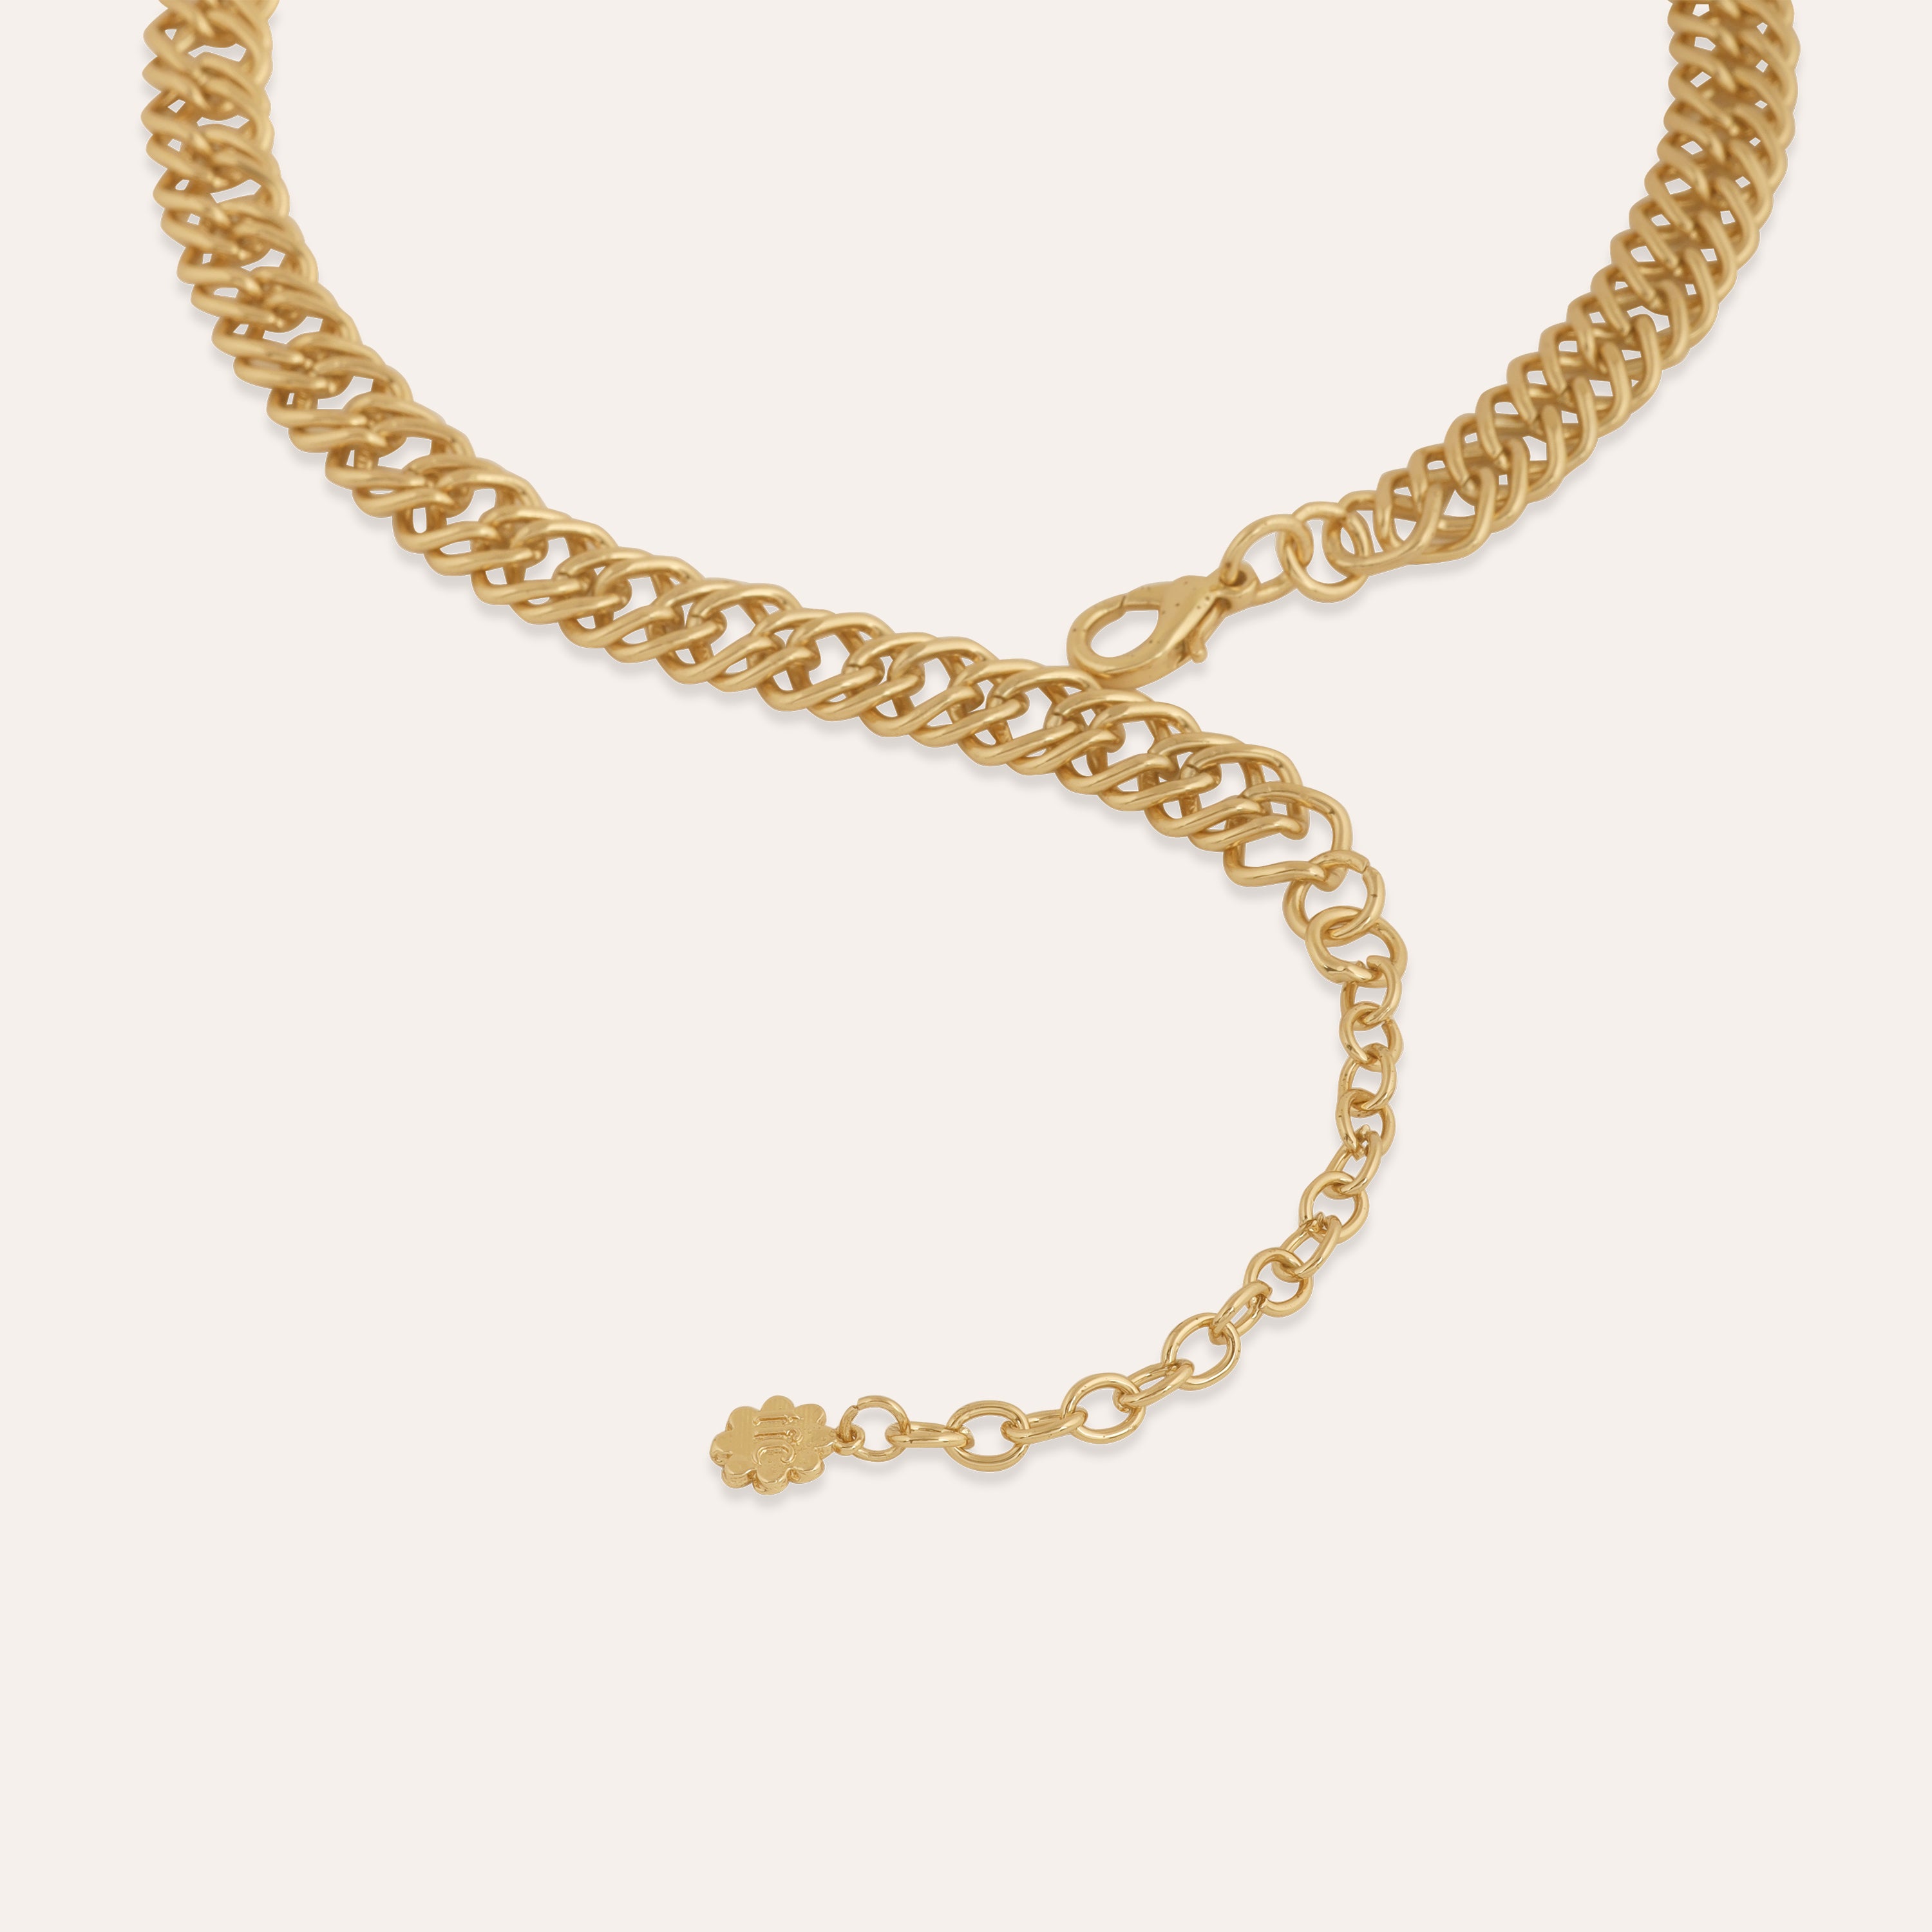 TFC Milano Luxury Gold Plated Chain Necklace-Enhance your elegance with our collection of gold-plated necklaces for women. Choose from stunning pendant necklaces, chic choker necklaces, and trendy layered necklaces. Our sleek and dainty designs are both affordable and anti-tarnish, ensuring lasting beauty. Enjoy the cheapest fashion jewellery, lightweight and stylish- only at The Fun Company